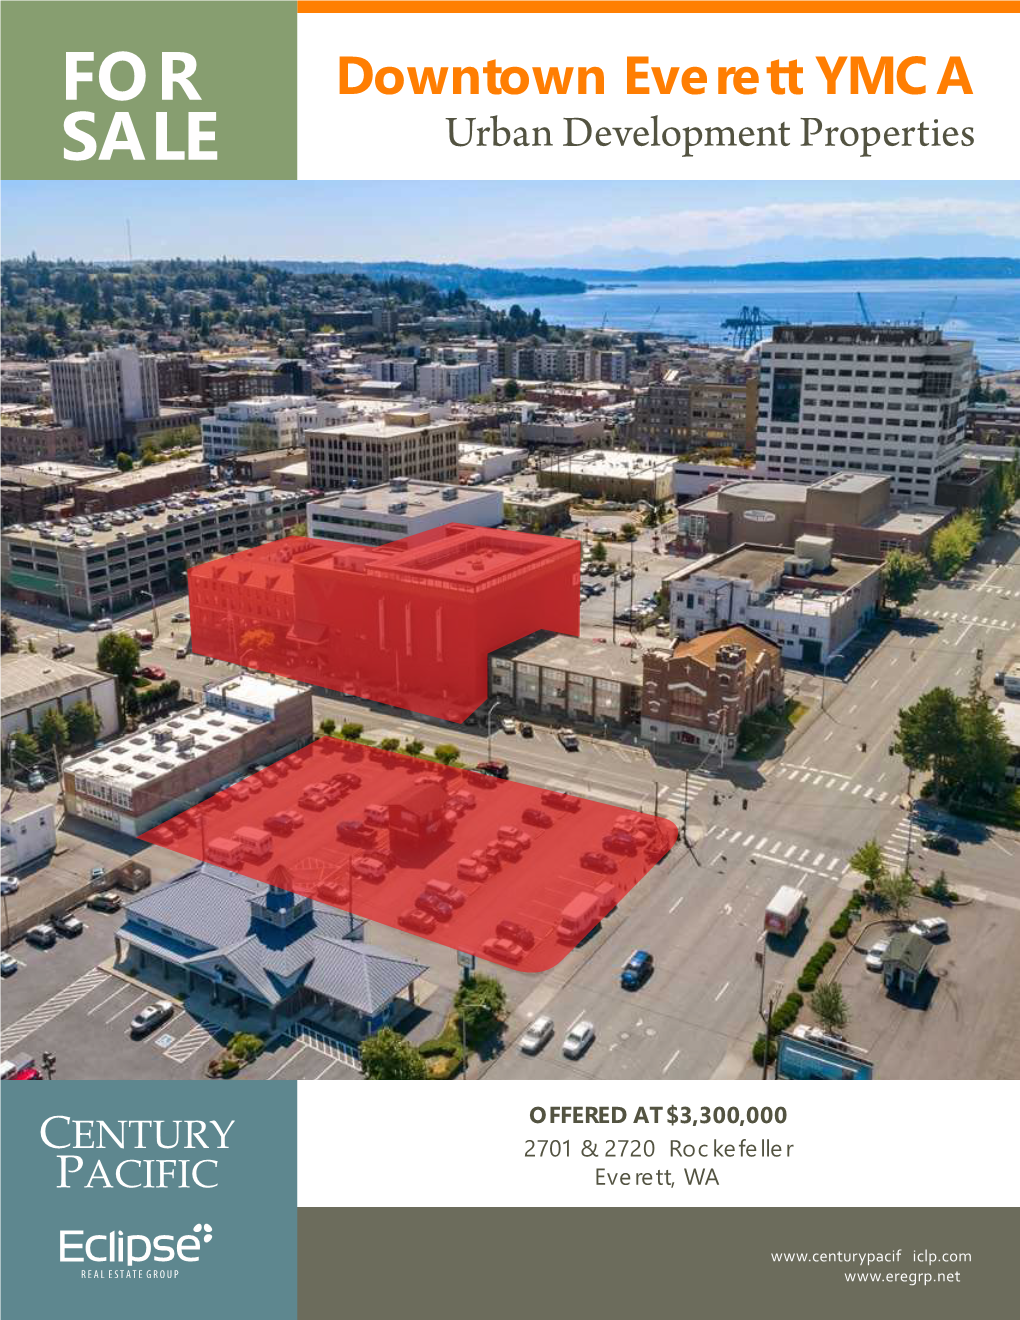 For Sale Approximately 1.25 Acres of Land in Everett, Washington (The “Property”)